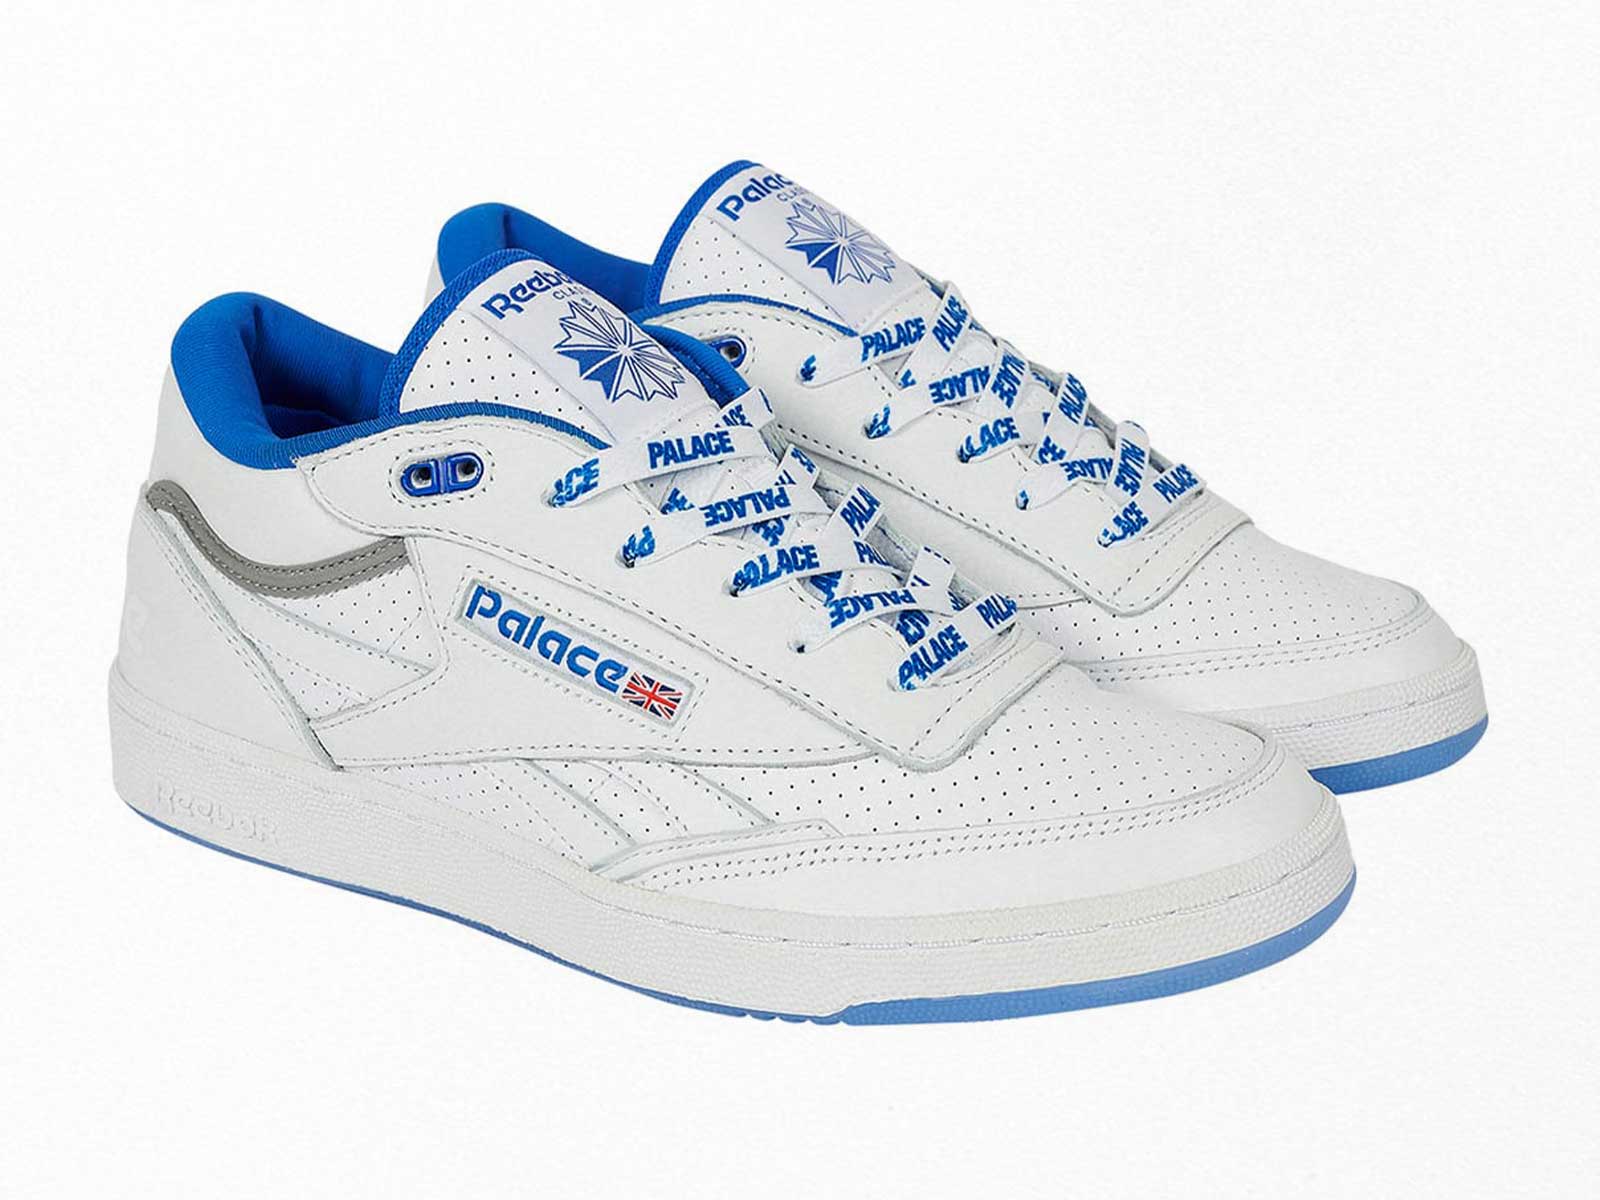 Palace and Reebok team up to elevate Club C II Mid Revenge silhouette